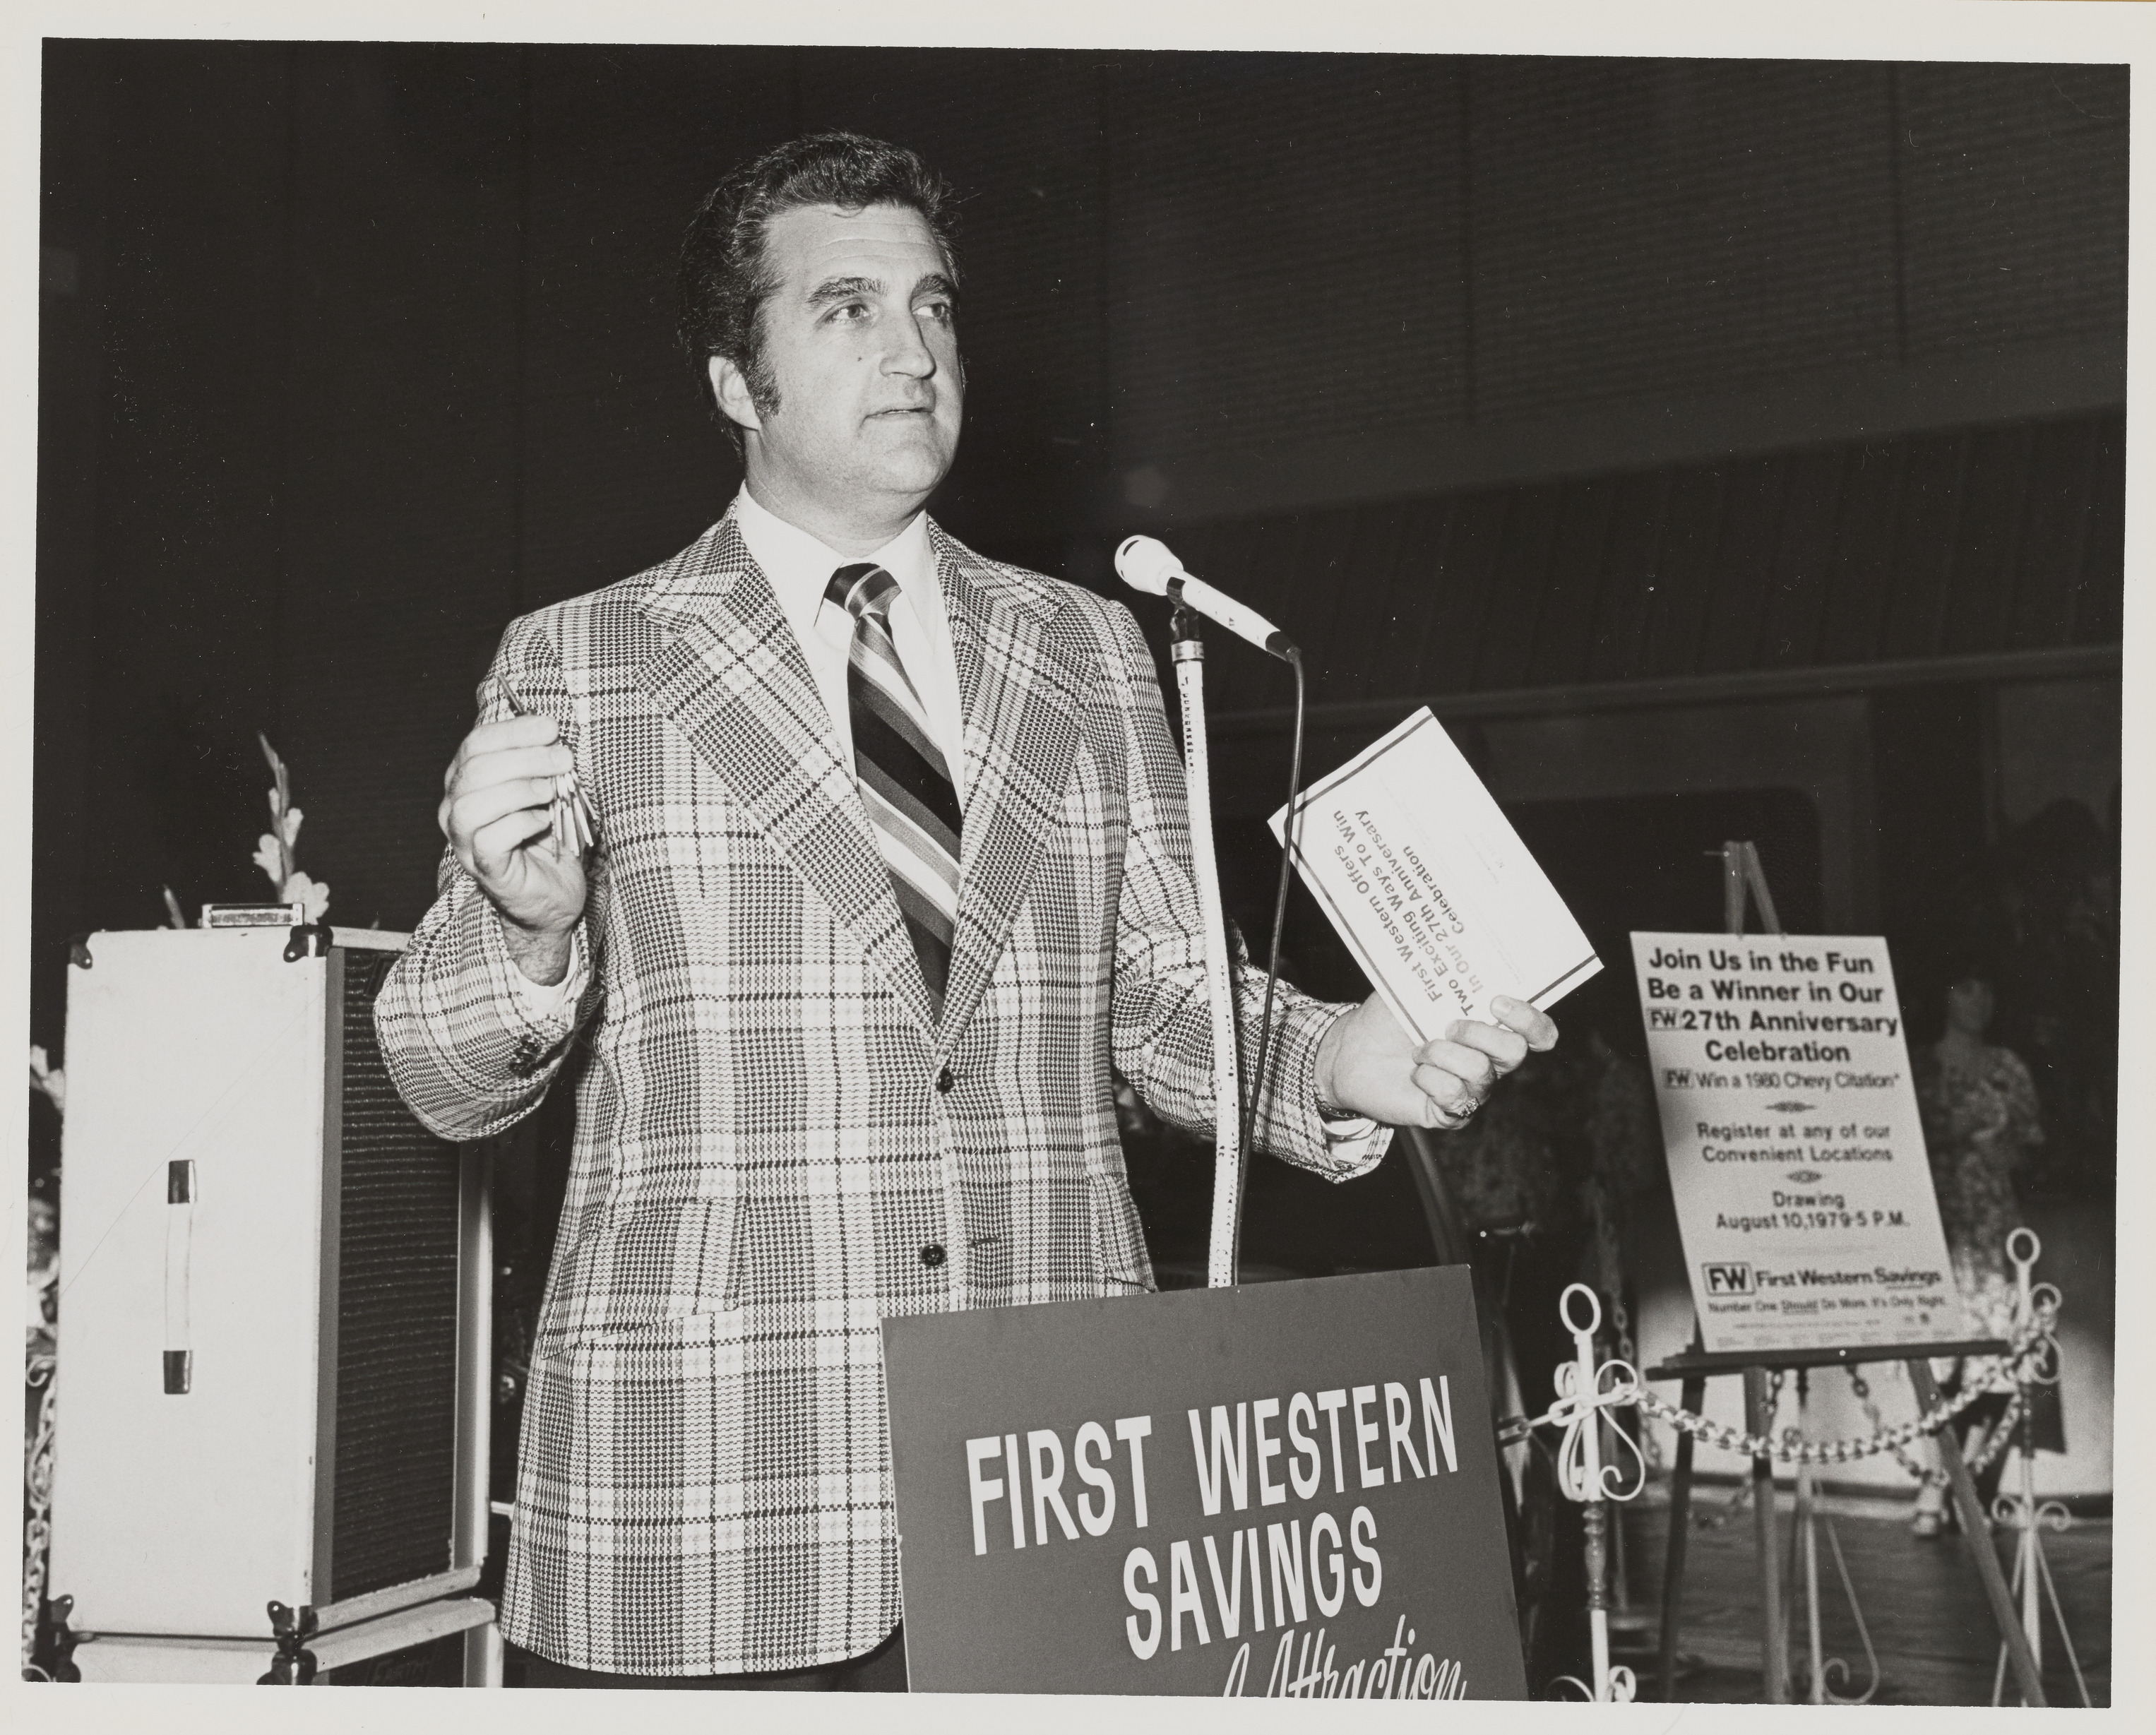 Photograph of  Ron Lurie at event for First Western Savings, 1979